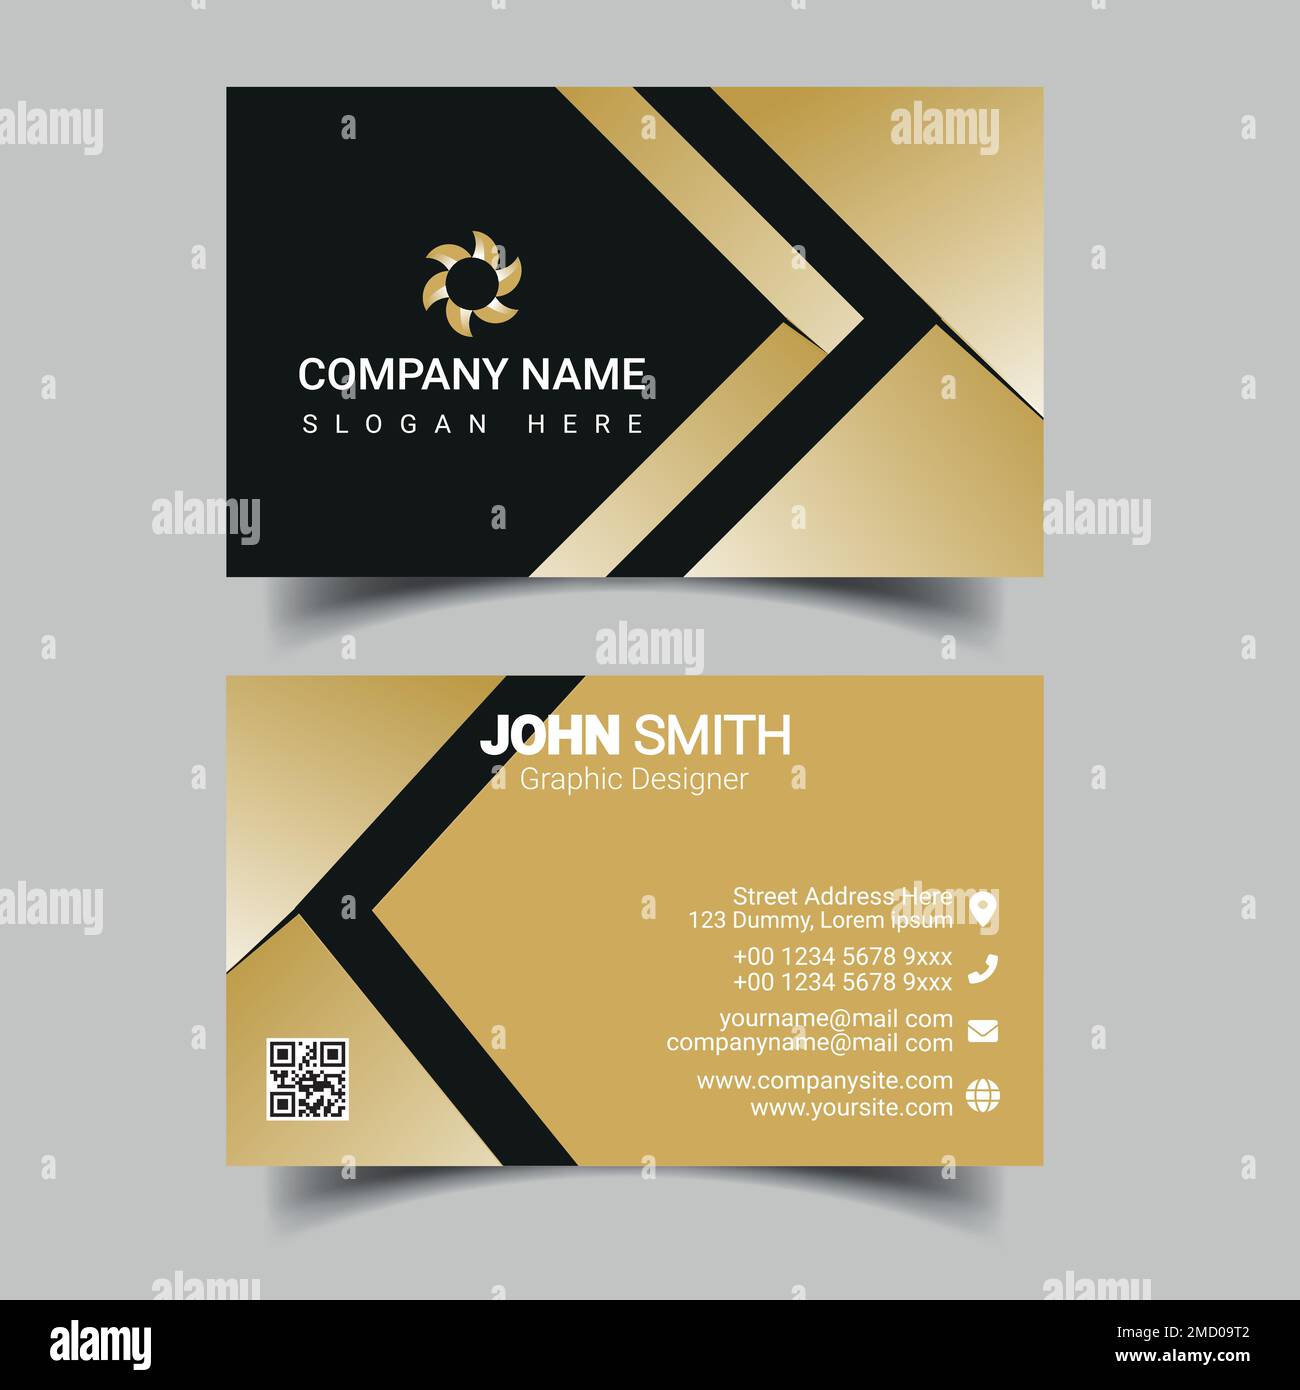 Professional business card design template for company or business. Two color simple but professional design. Compatible for business and personal use Stock Vector